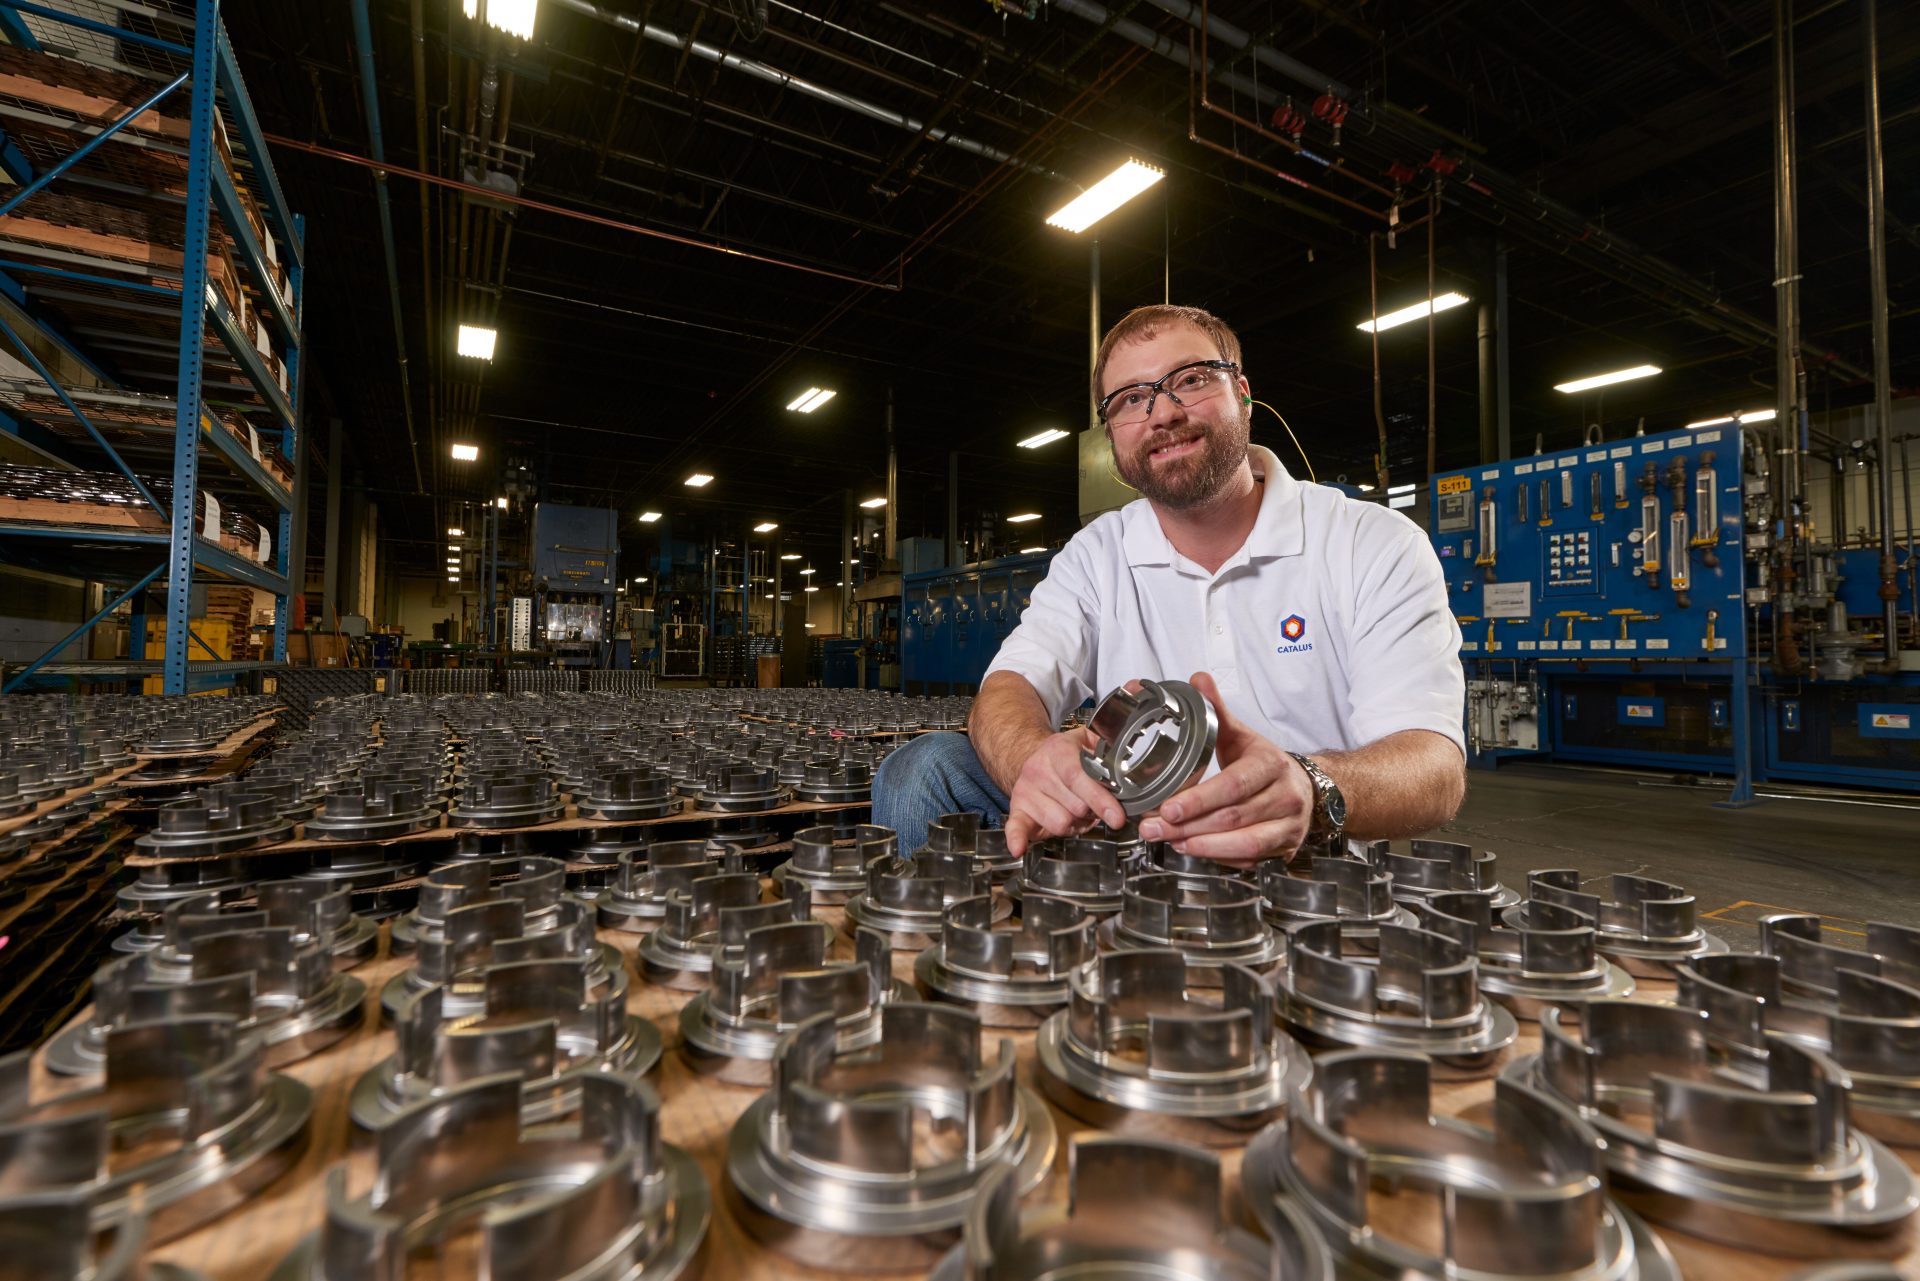 Plant manager Joe Glass poses with automotive parts manufactured by Catalus Corp. (Photo provided by Dave Parsons)